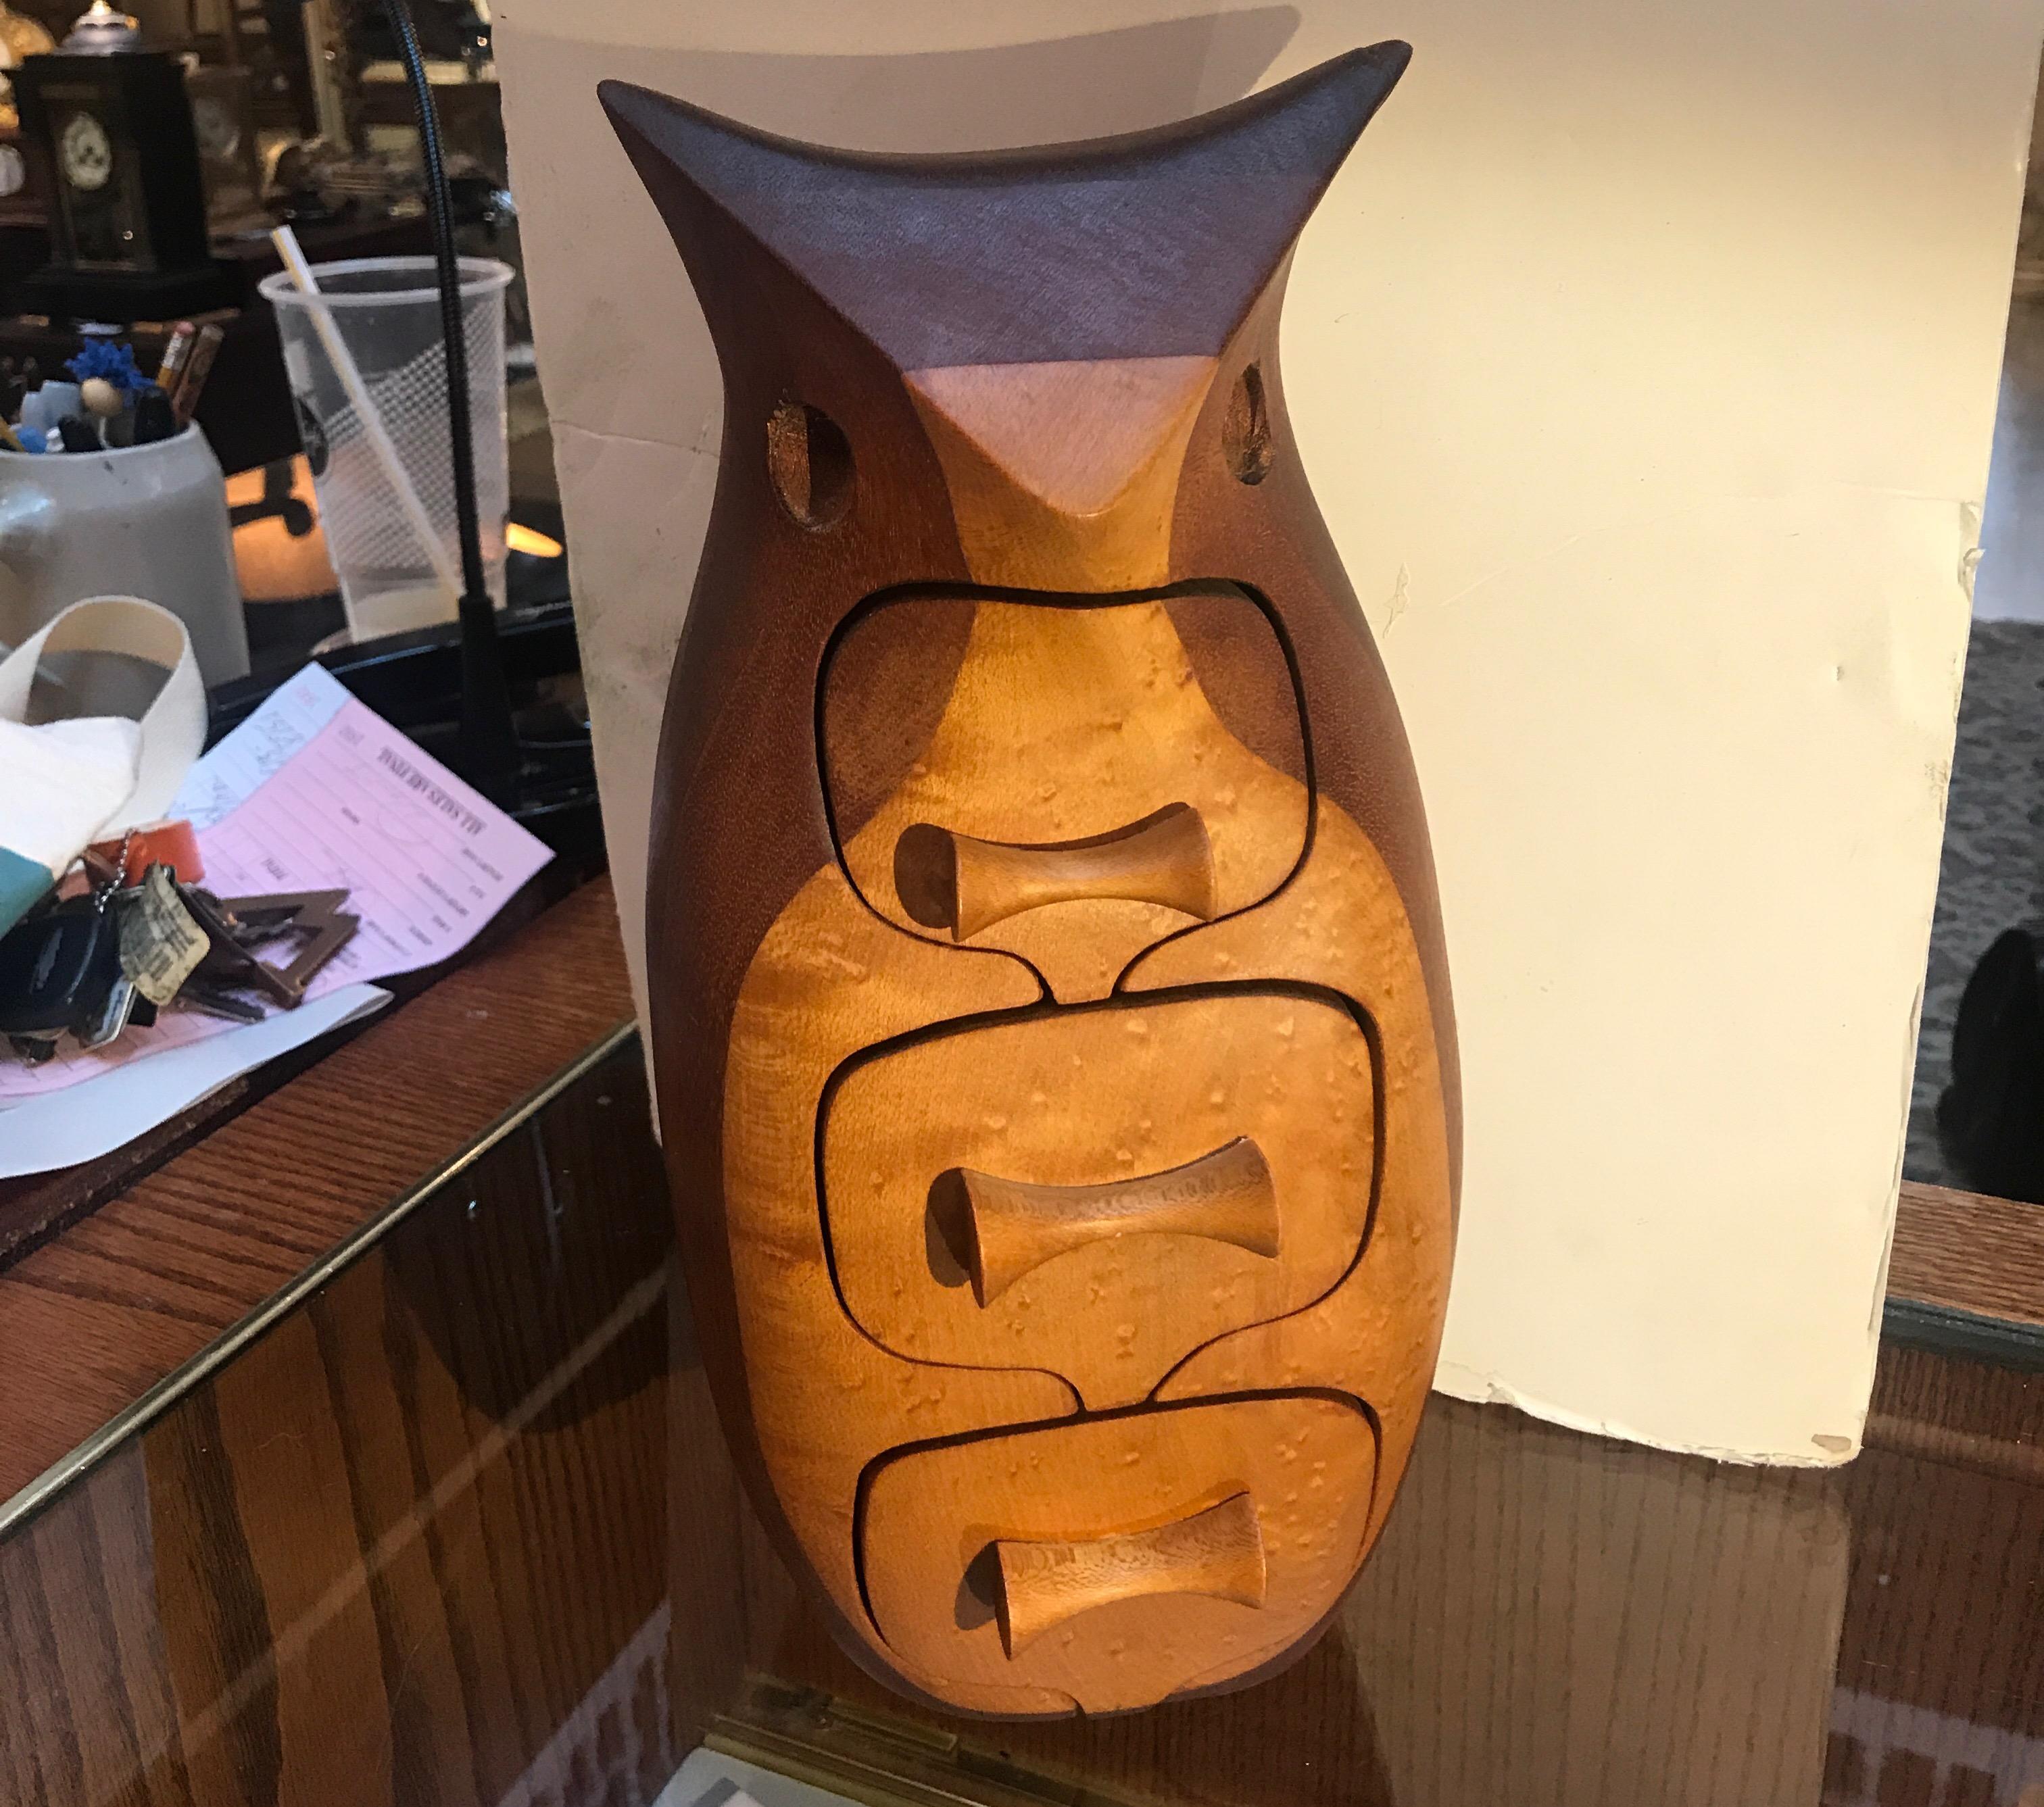 Bump is a Vermont-based wood sculptor best known for her stylized modernist wood jewelry boxes of various animal forms crafted in the 1970s and 1980s. 
This large owl box bump used burl maple in contrast and mahogany to create a dynamic visual